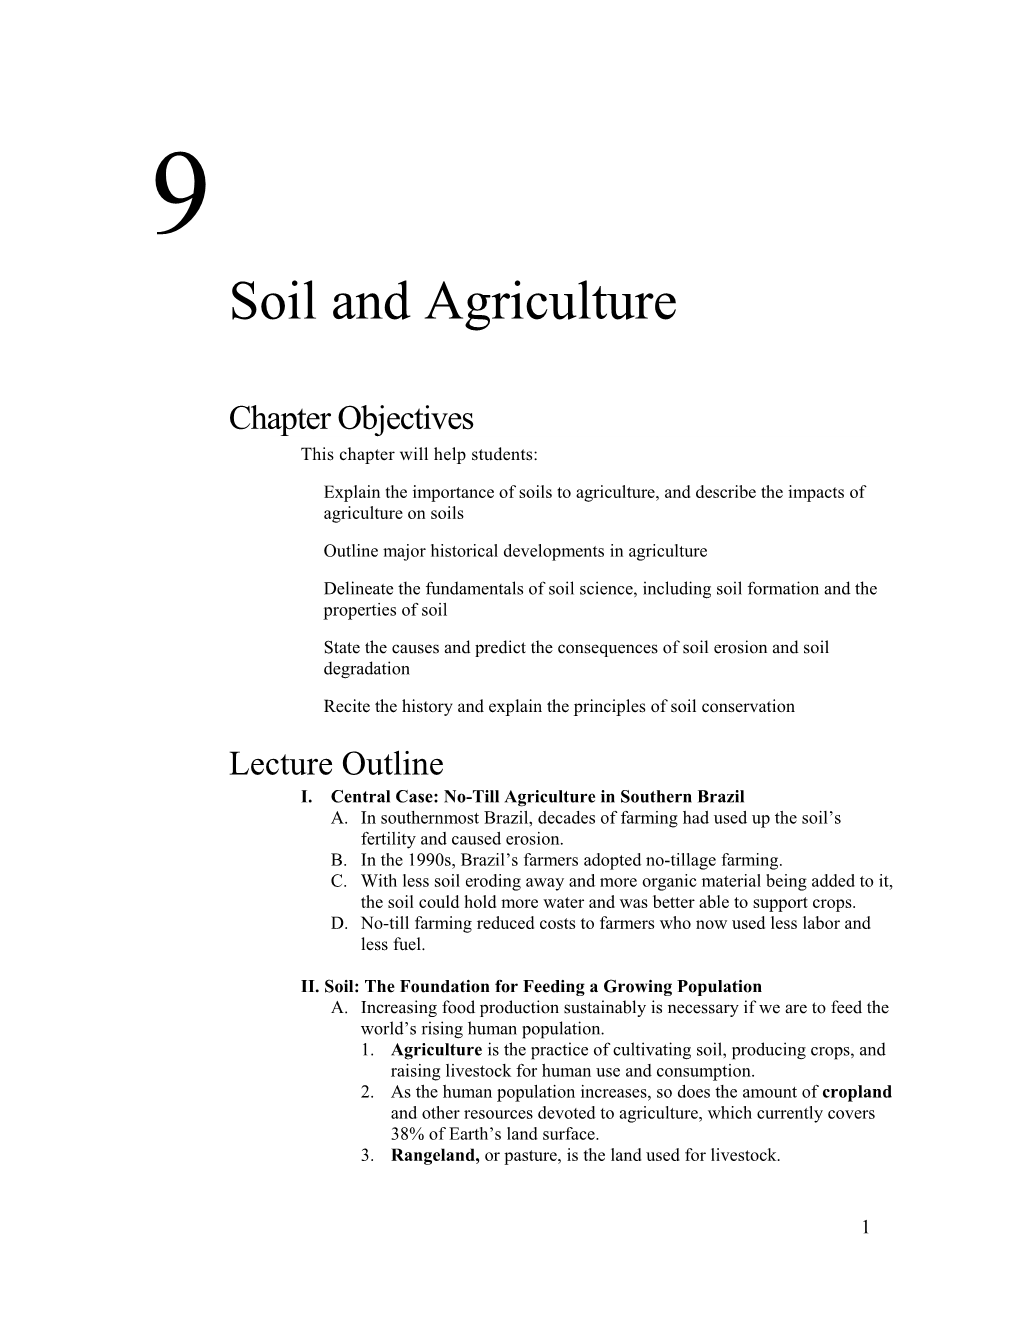 Soil and Agriculture